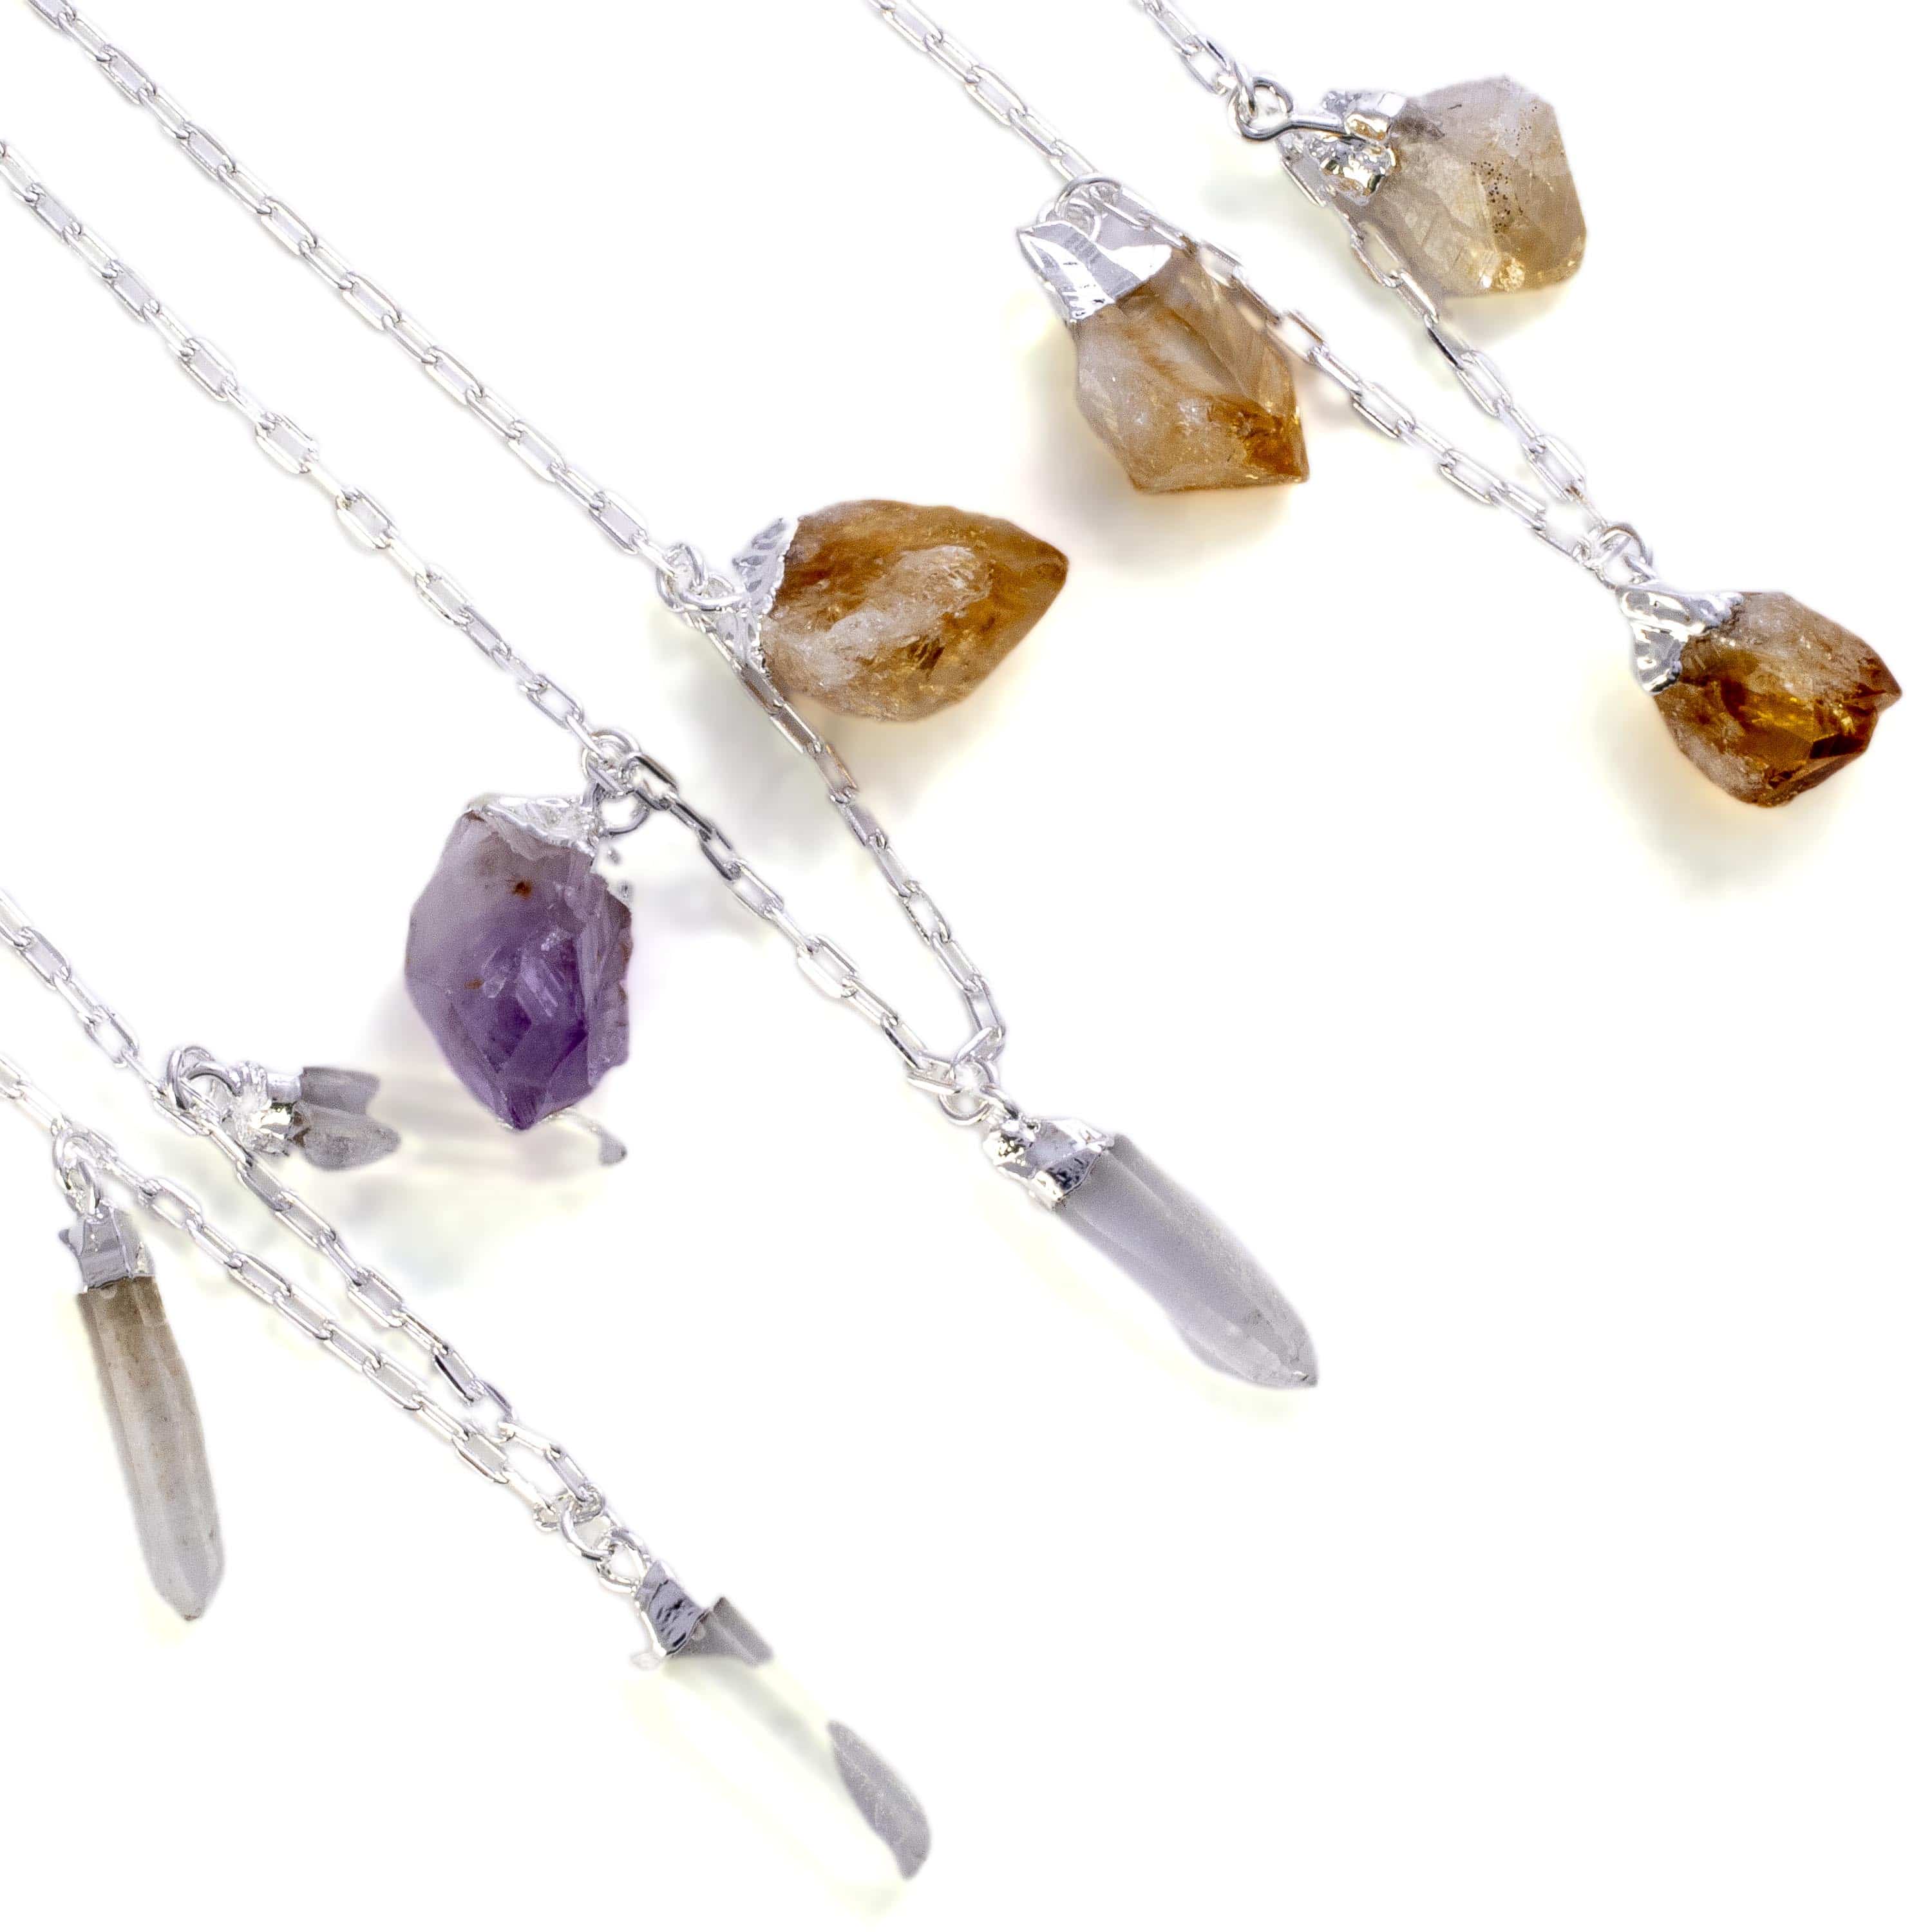 Kalifano Crystal Jewelry Amethyst, Citrine, and Quartz Triple Point Necklace CJN-2042-A+C+Q